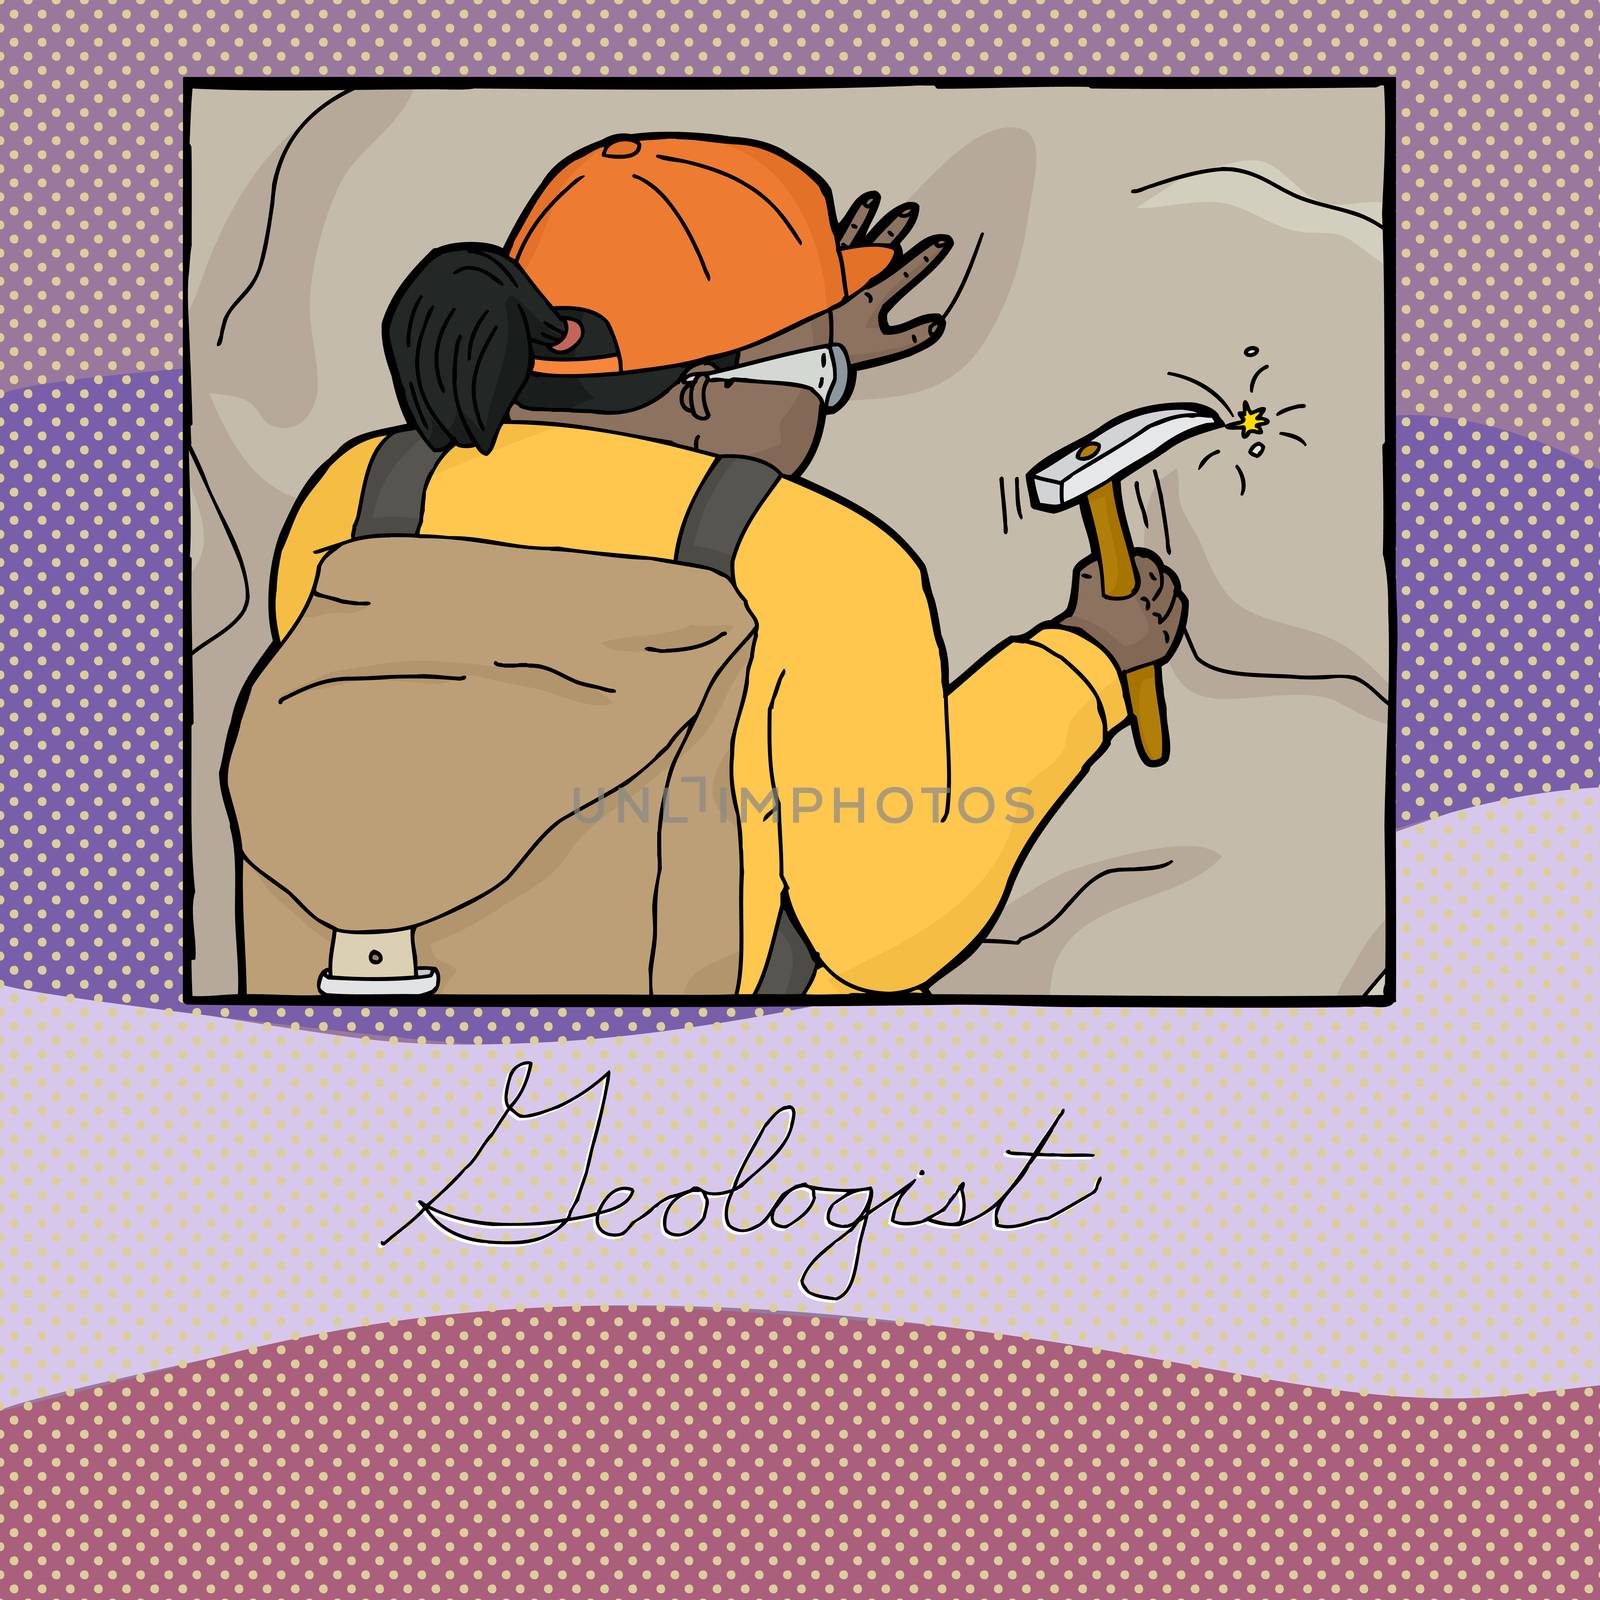 Hand drawn cartoon graphic about a female geologist